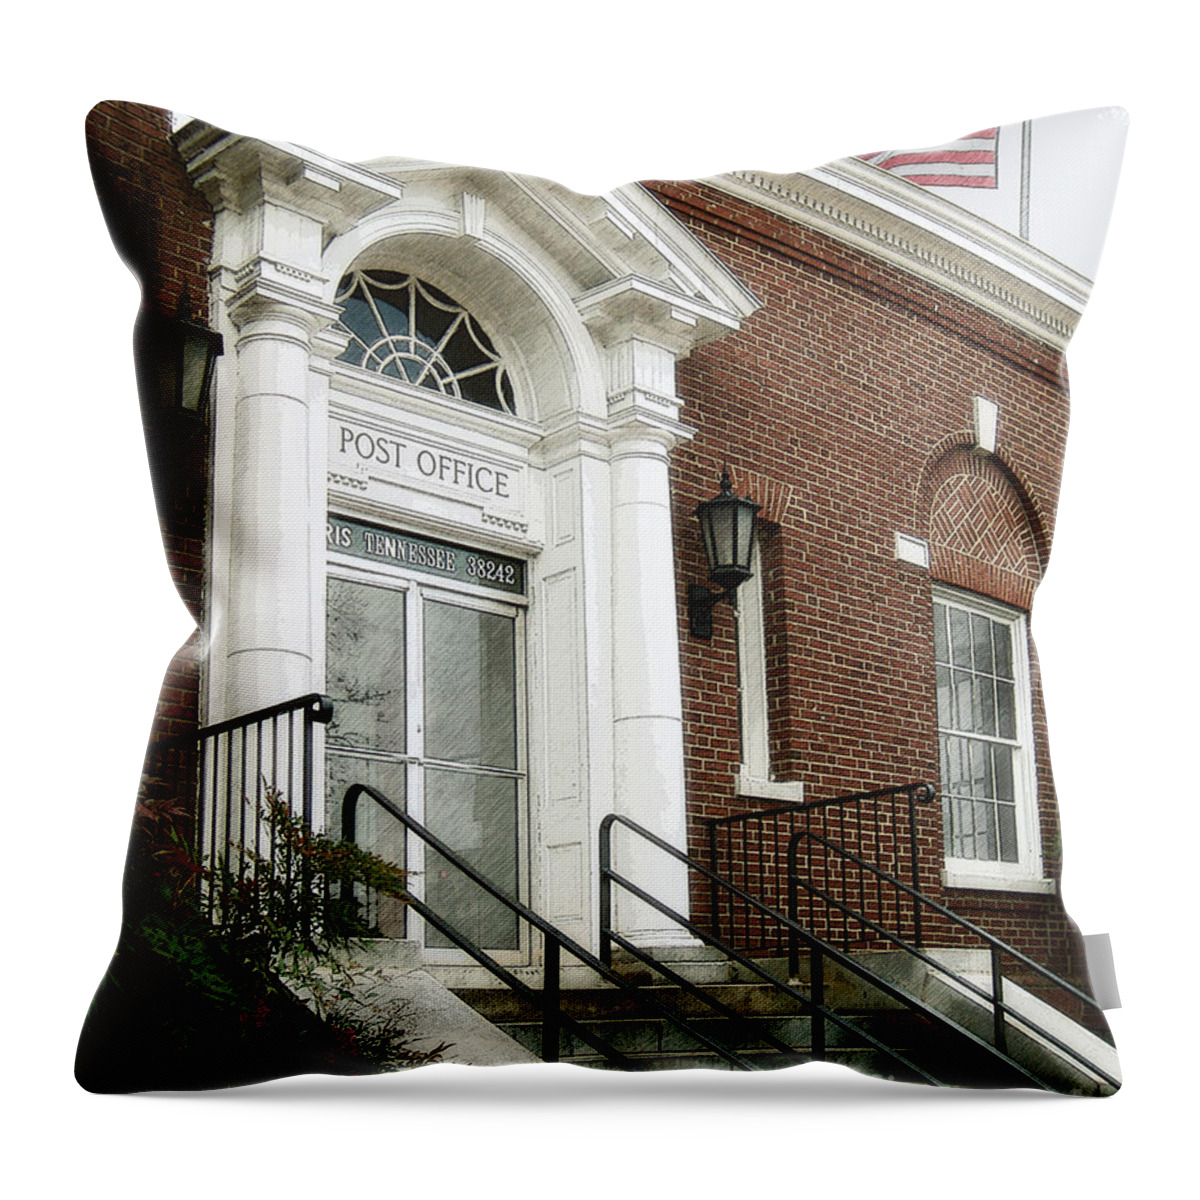 Windows On The Square Throw Pillow featuring the photograph Post Office 38242 by Lee Owenby